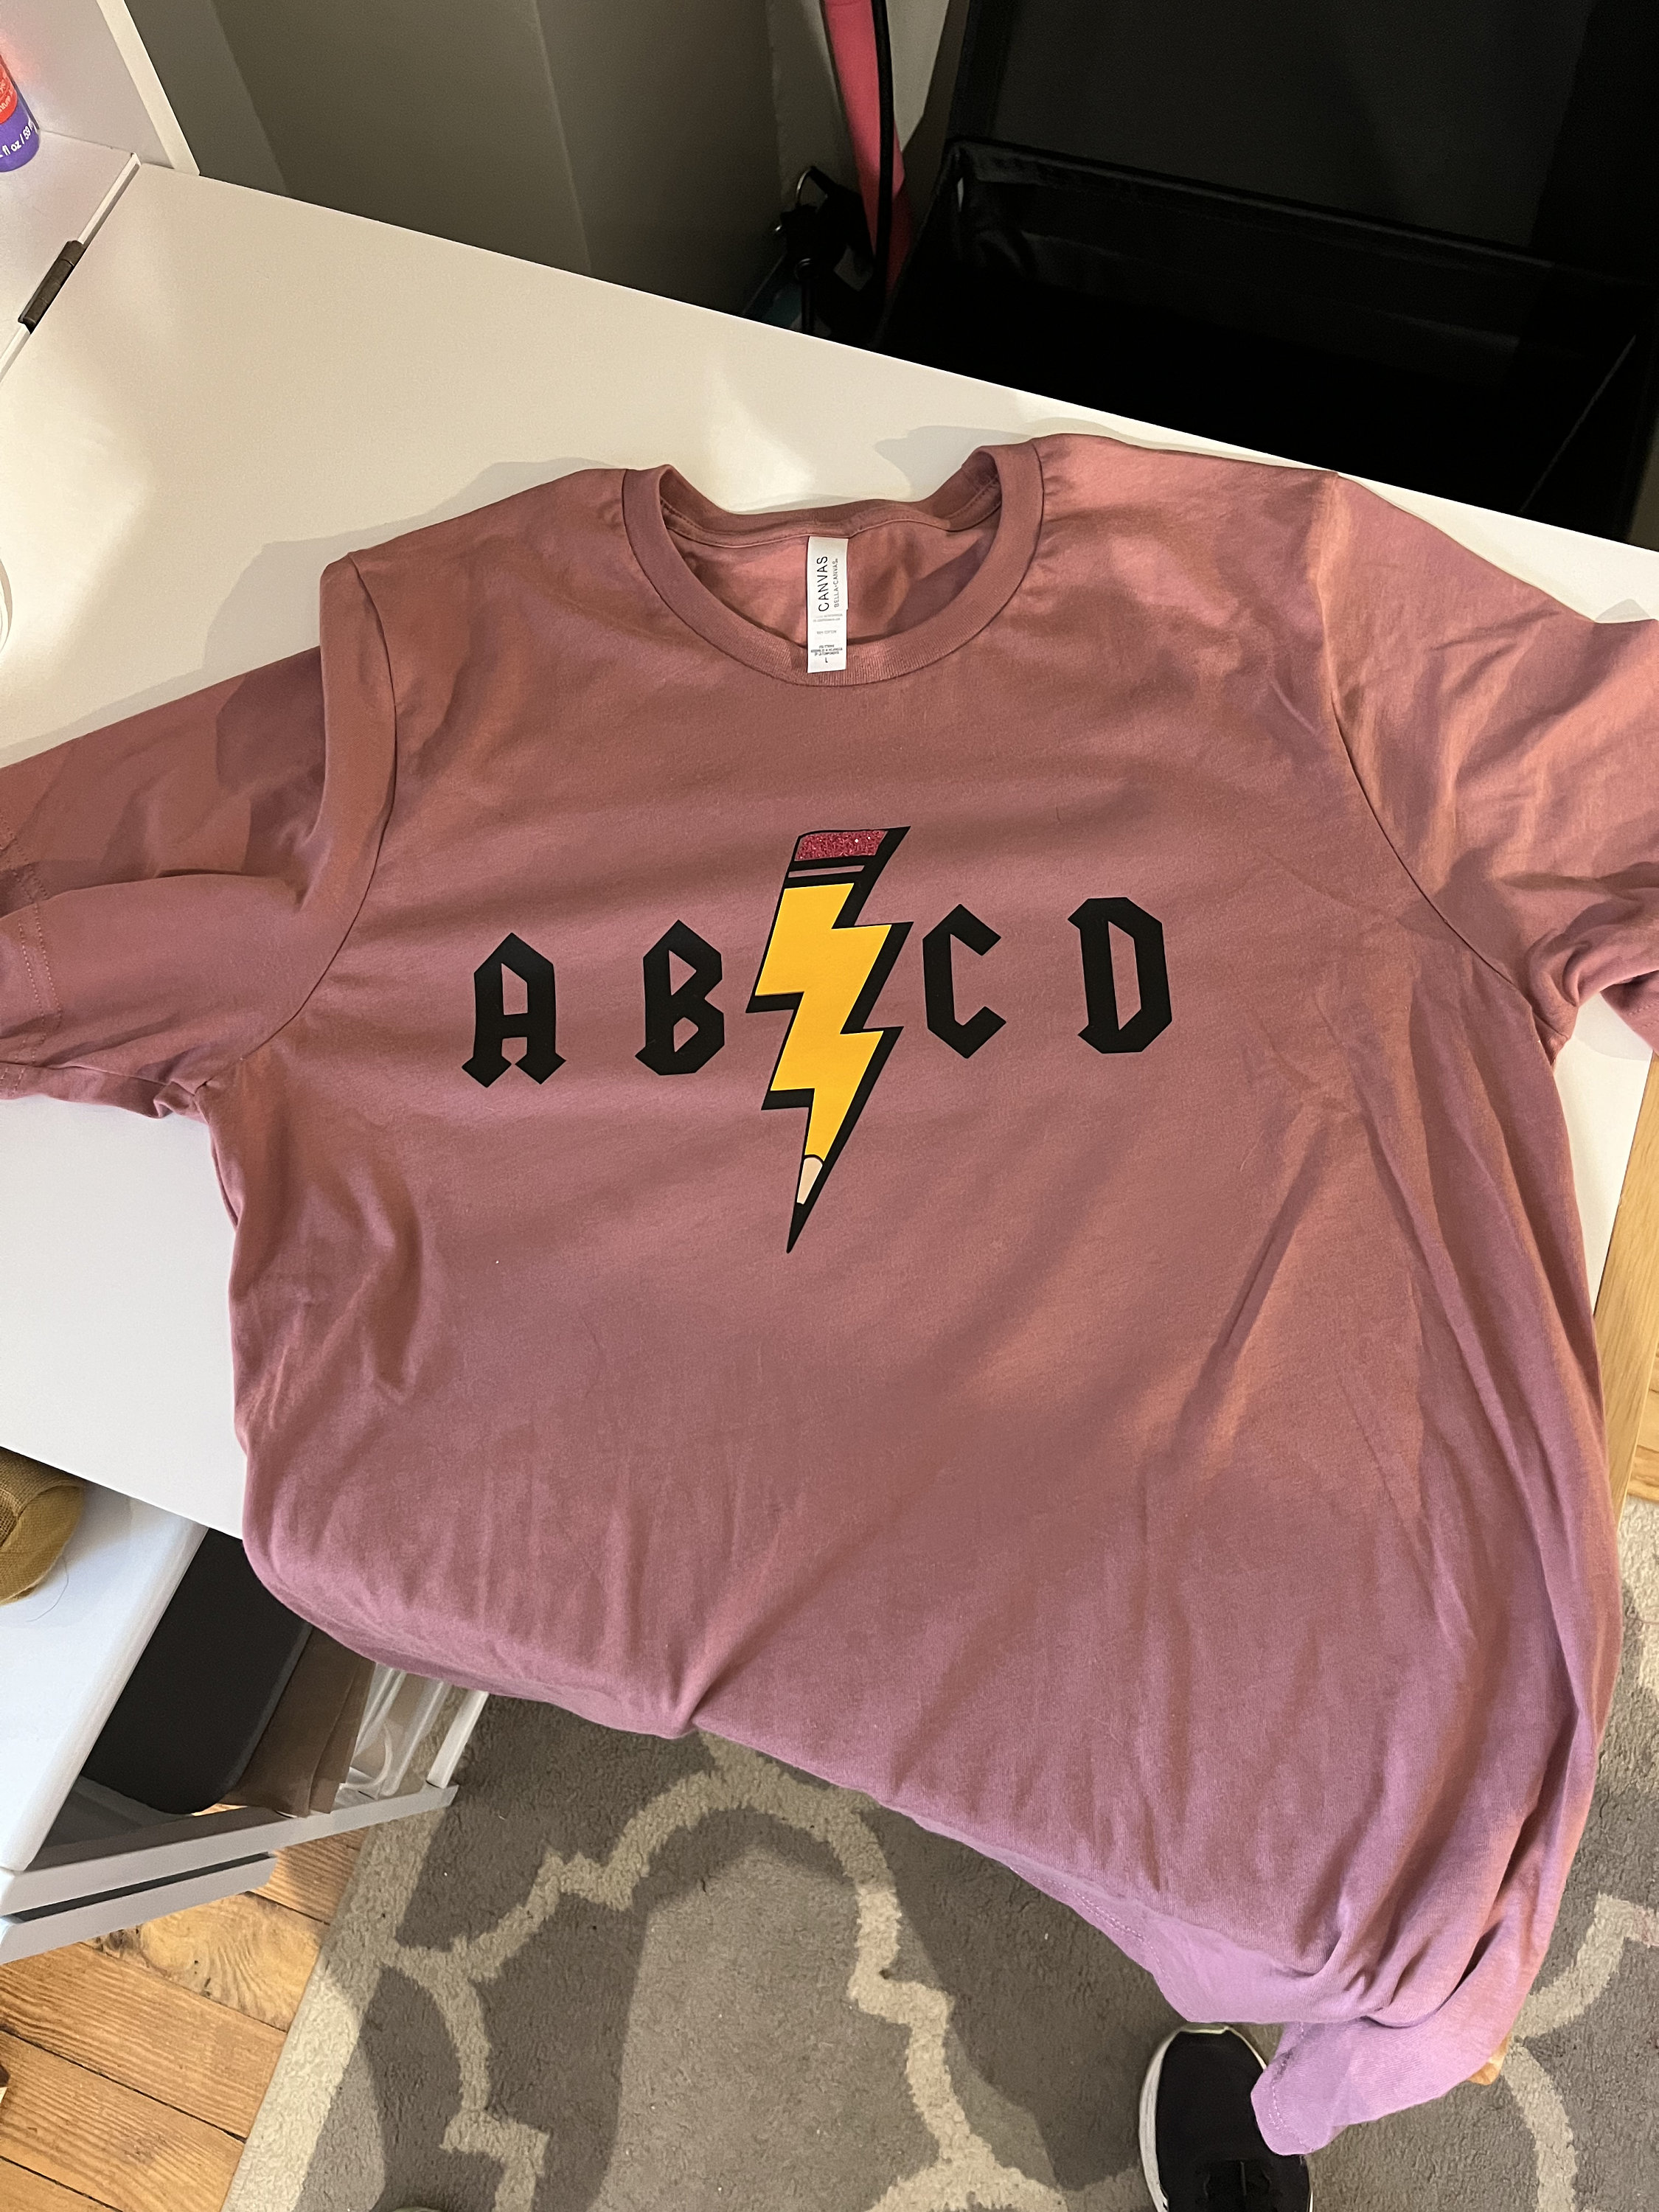 Abcd Acdc Etsy - Dc Ac